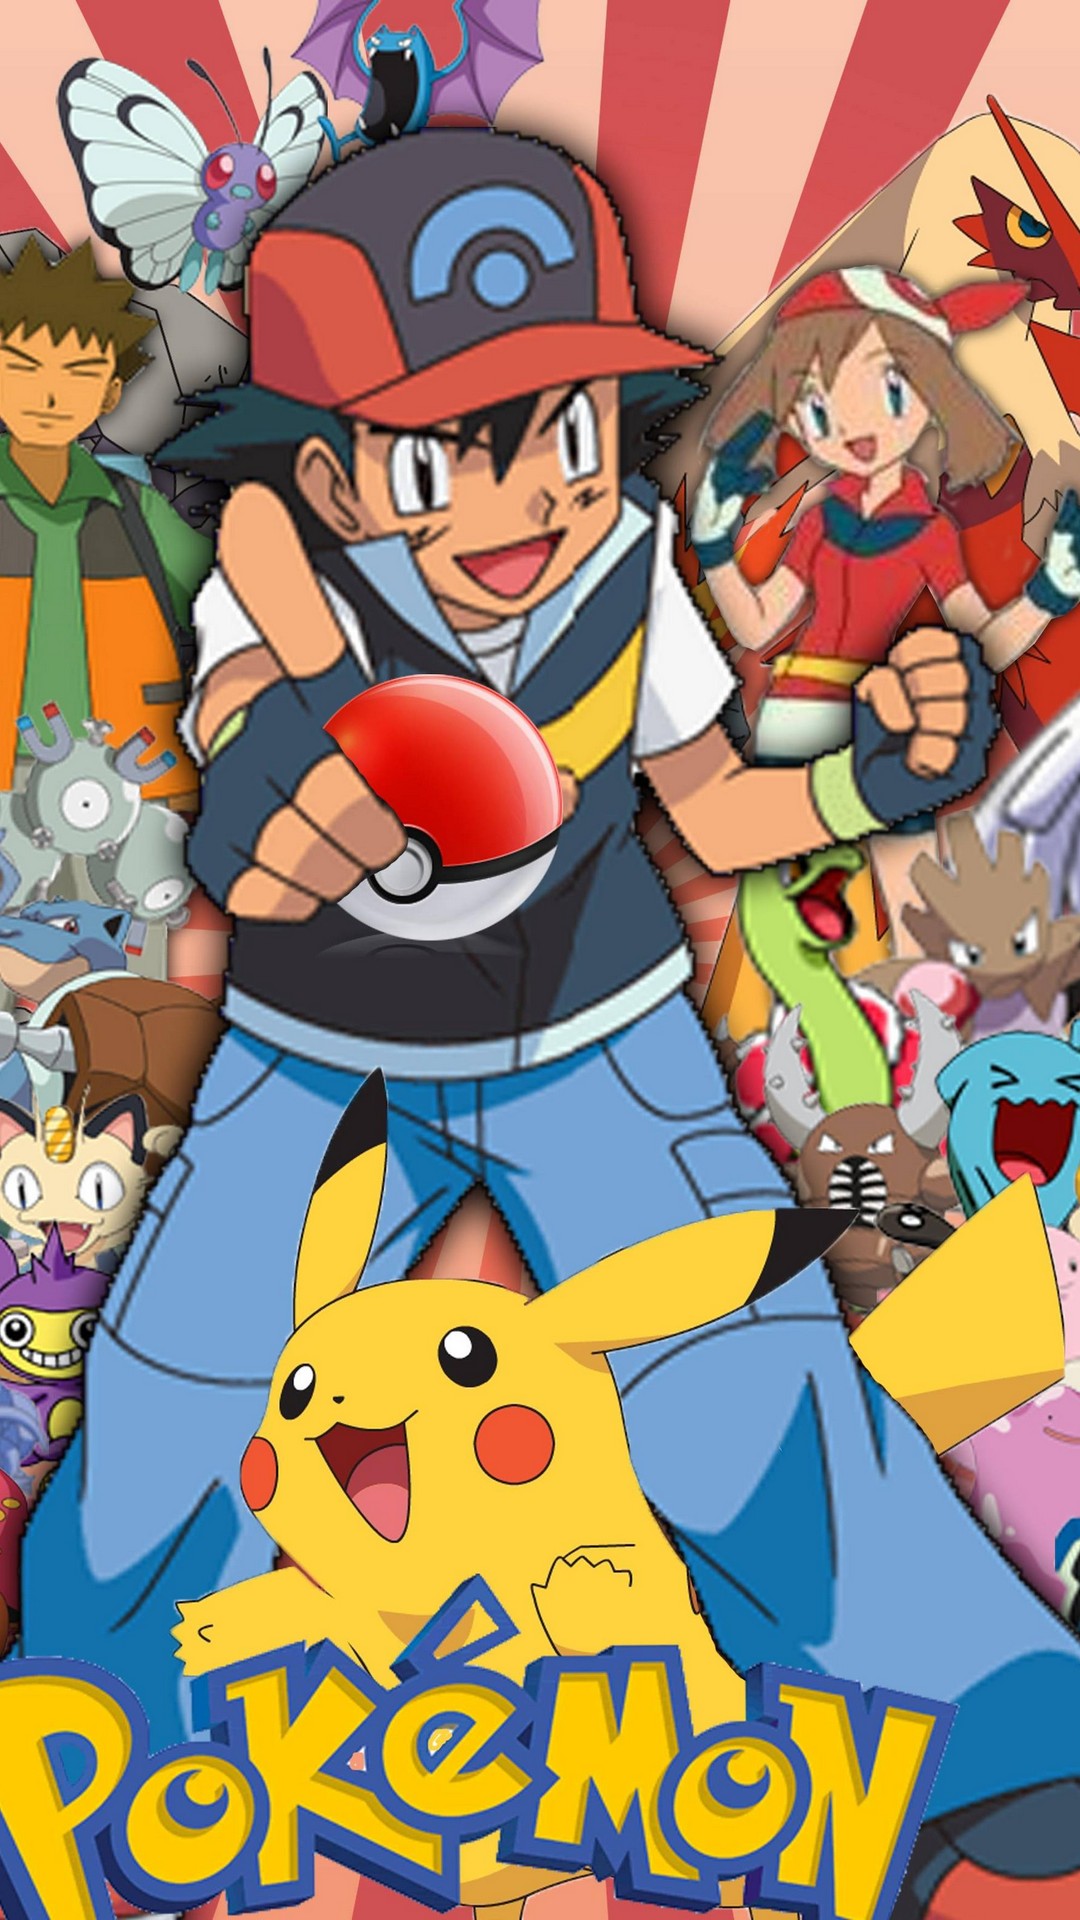 Pokemon Wallpaper For Phones With High-resolution Pixel - Pokemon Wallpaper  Hd For Phome - 1080x1920 Wallpaper 